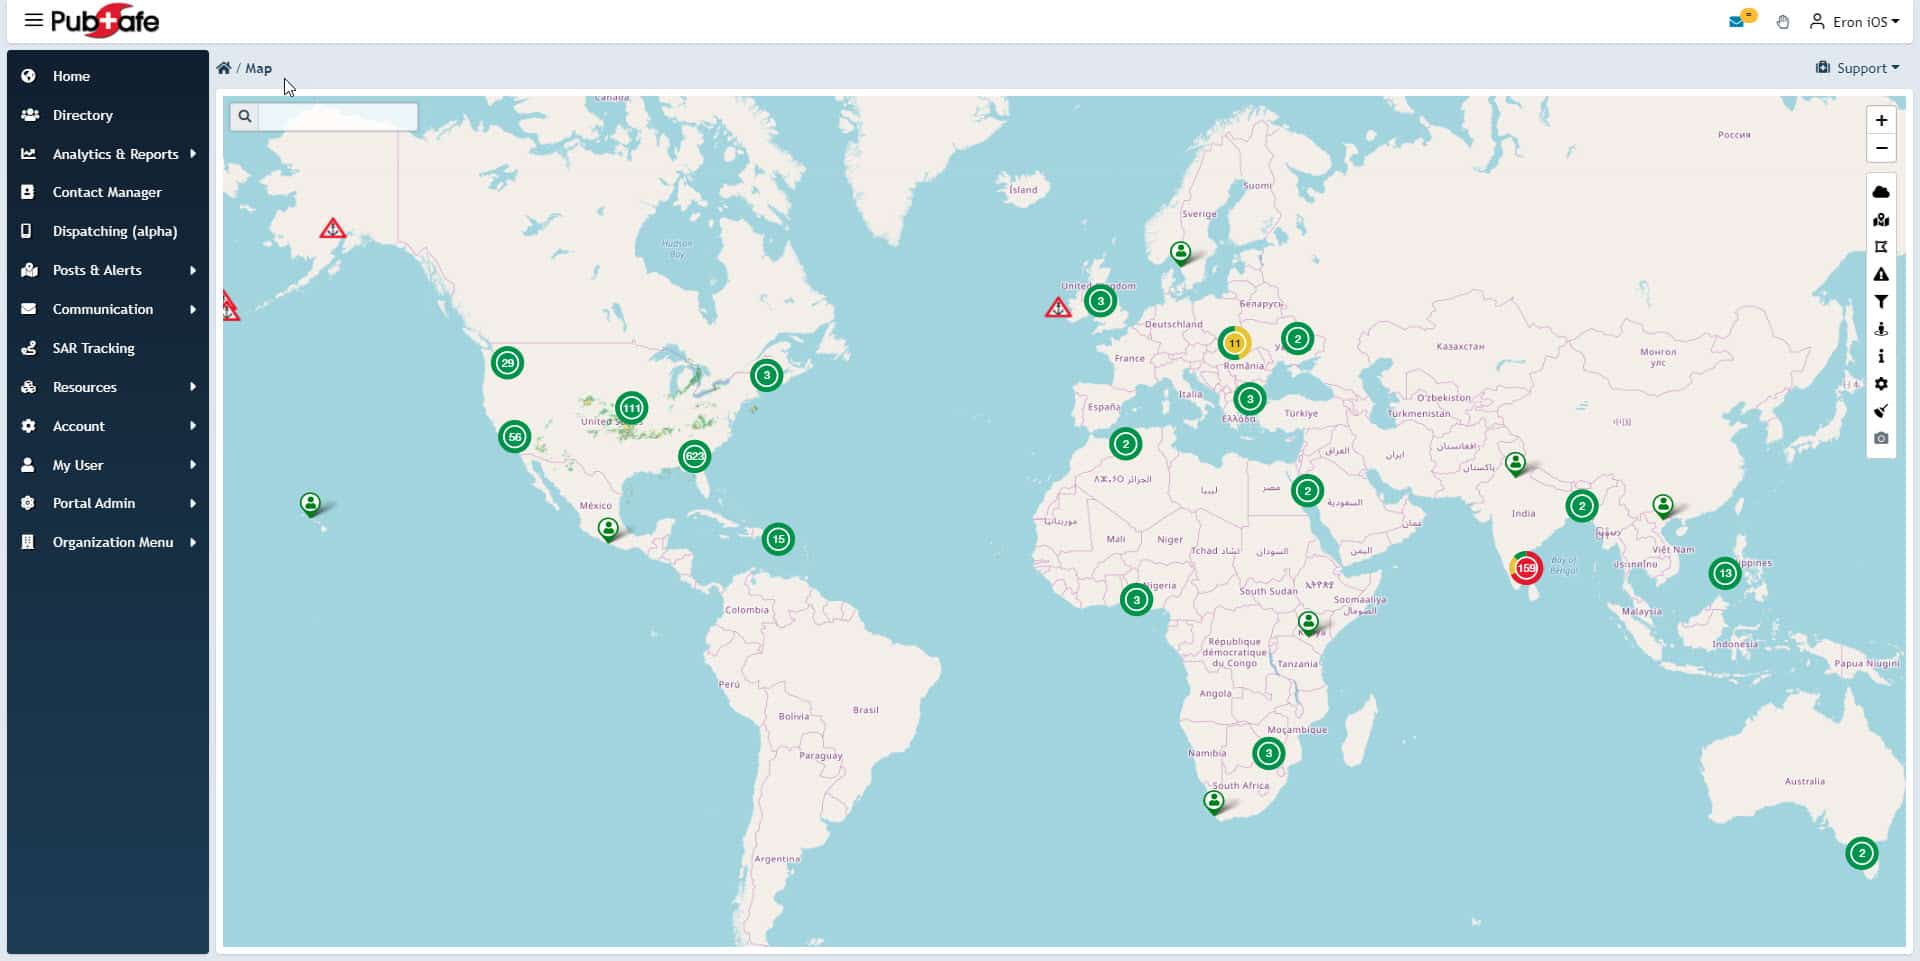 PubSafe Global Map Users